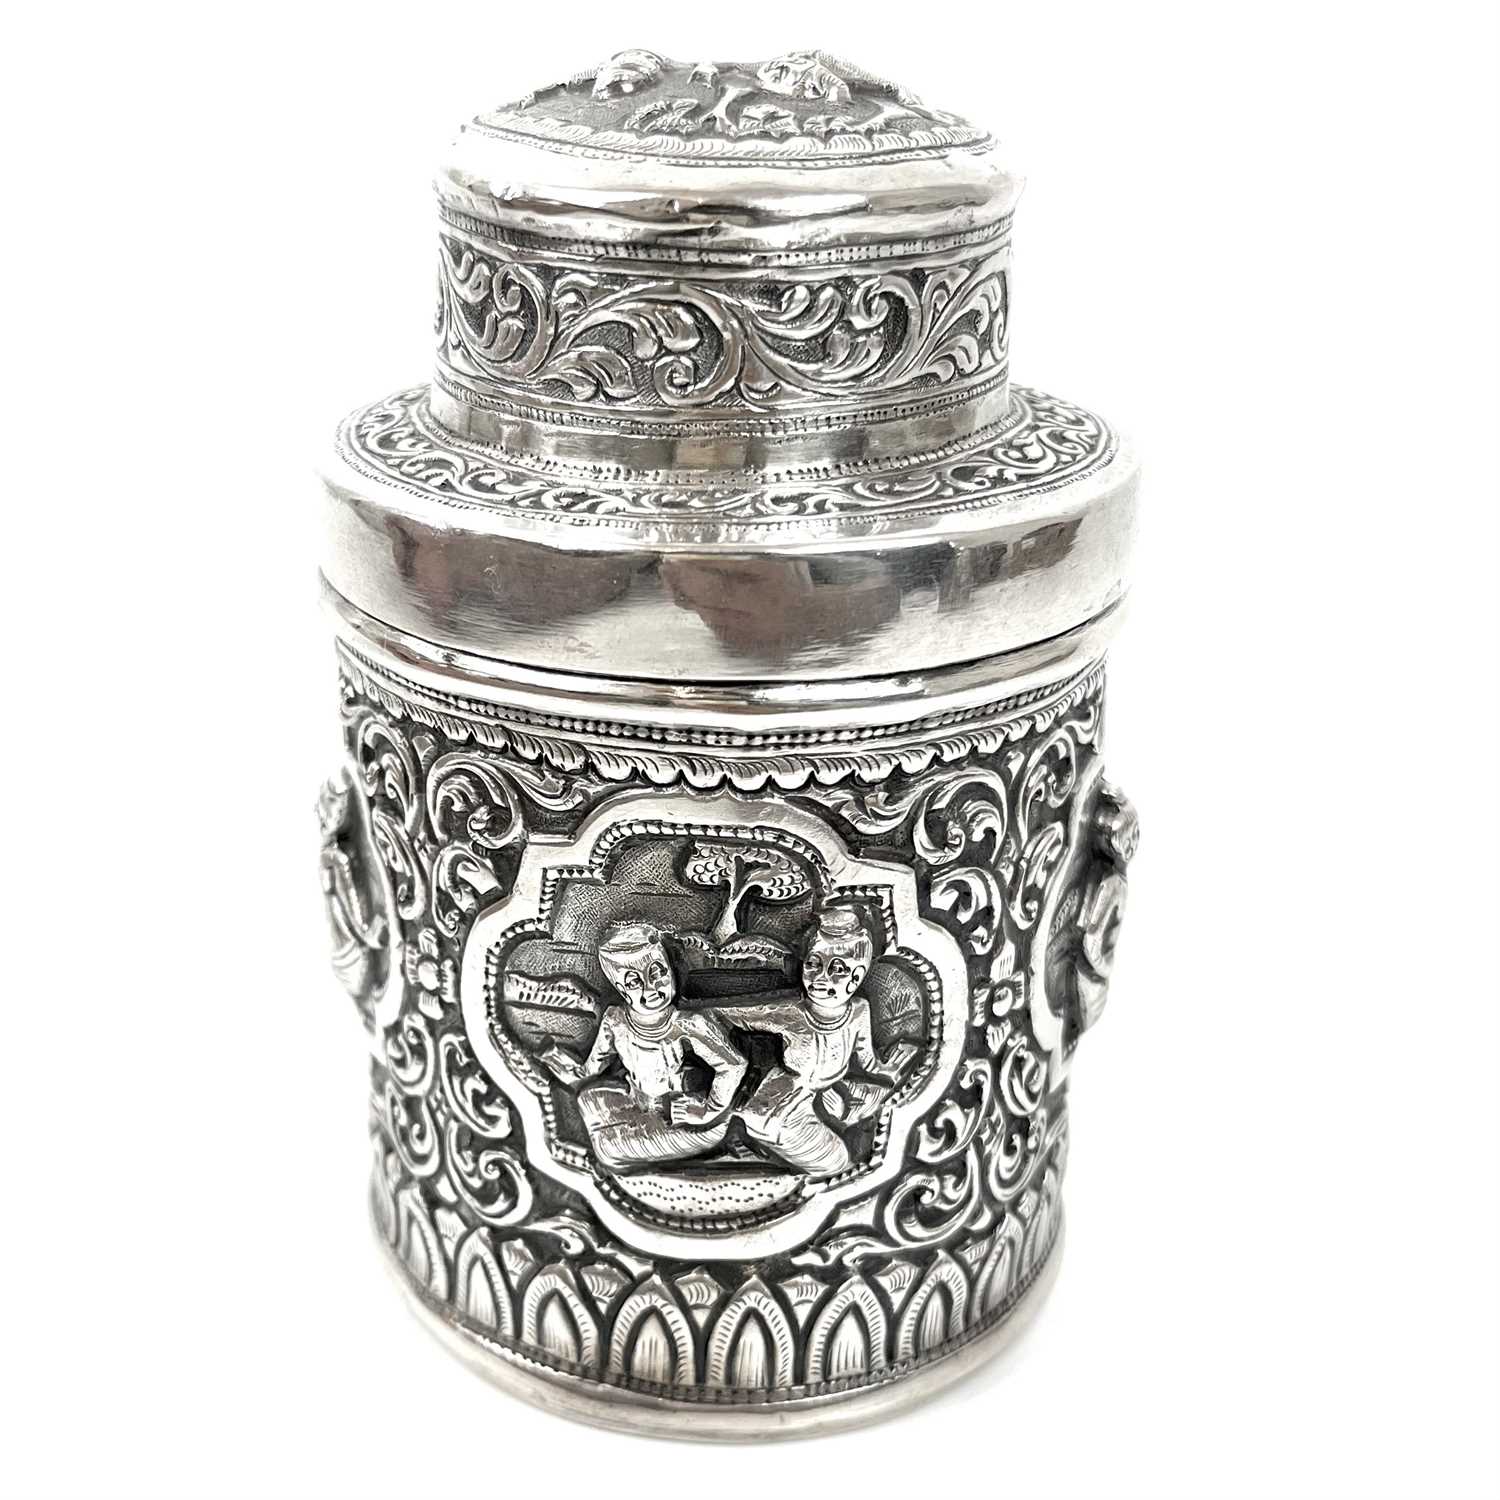 Two Burmese silver lidded cannisters, mid 20th century - Image 3 of 25